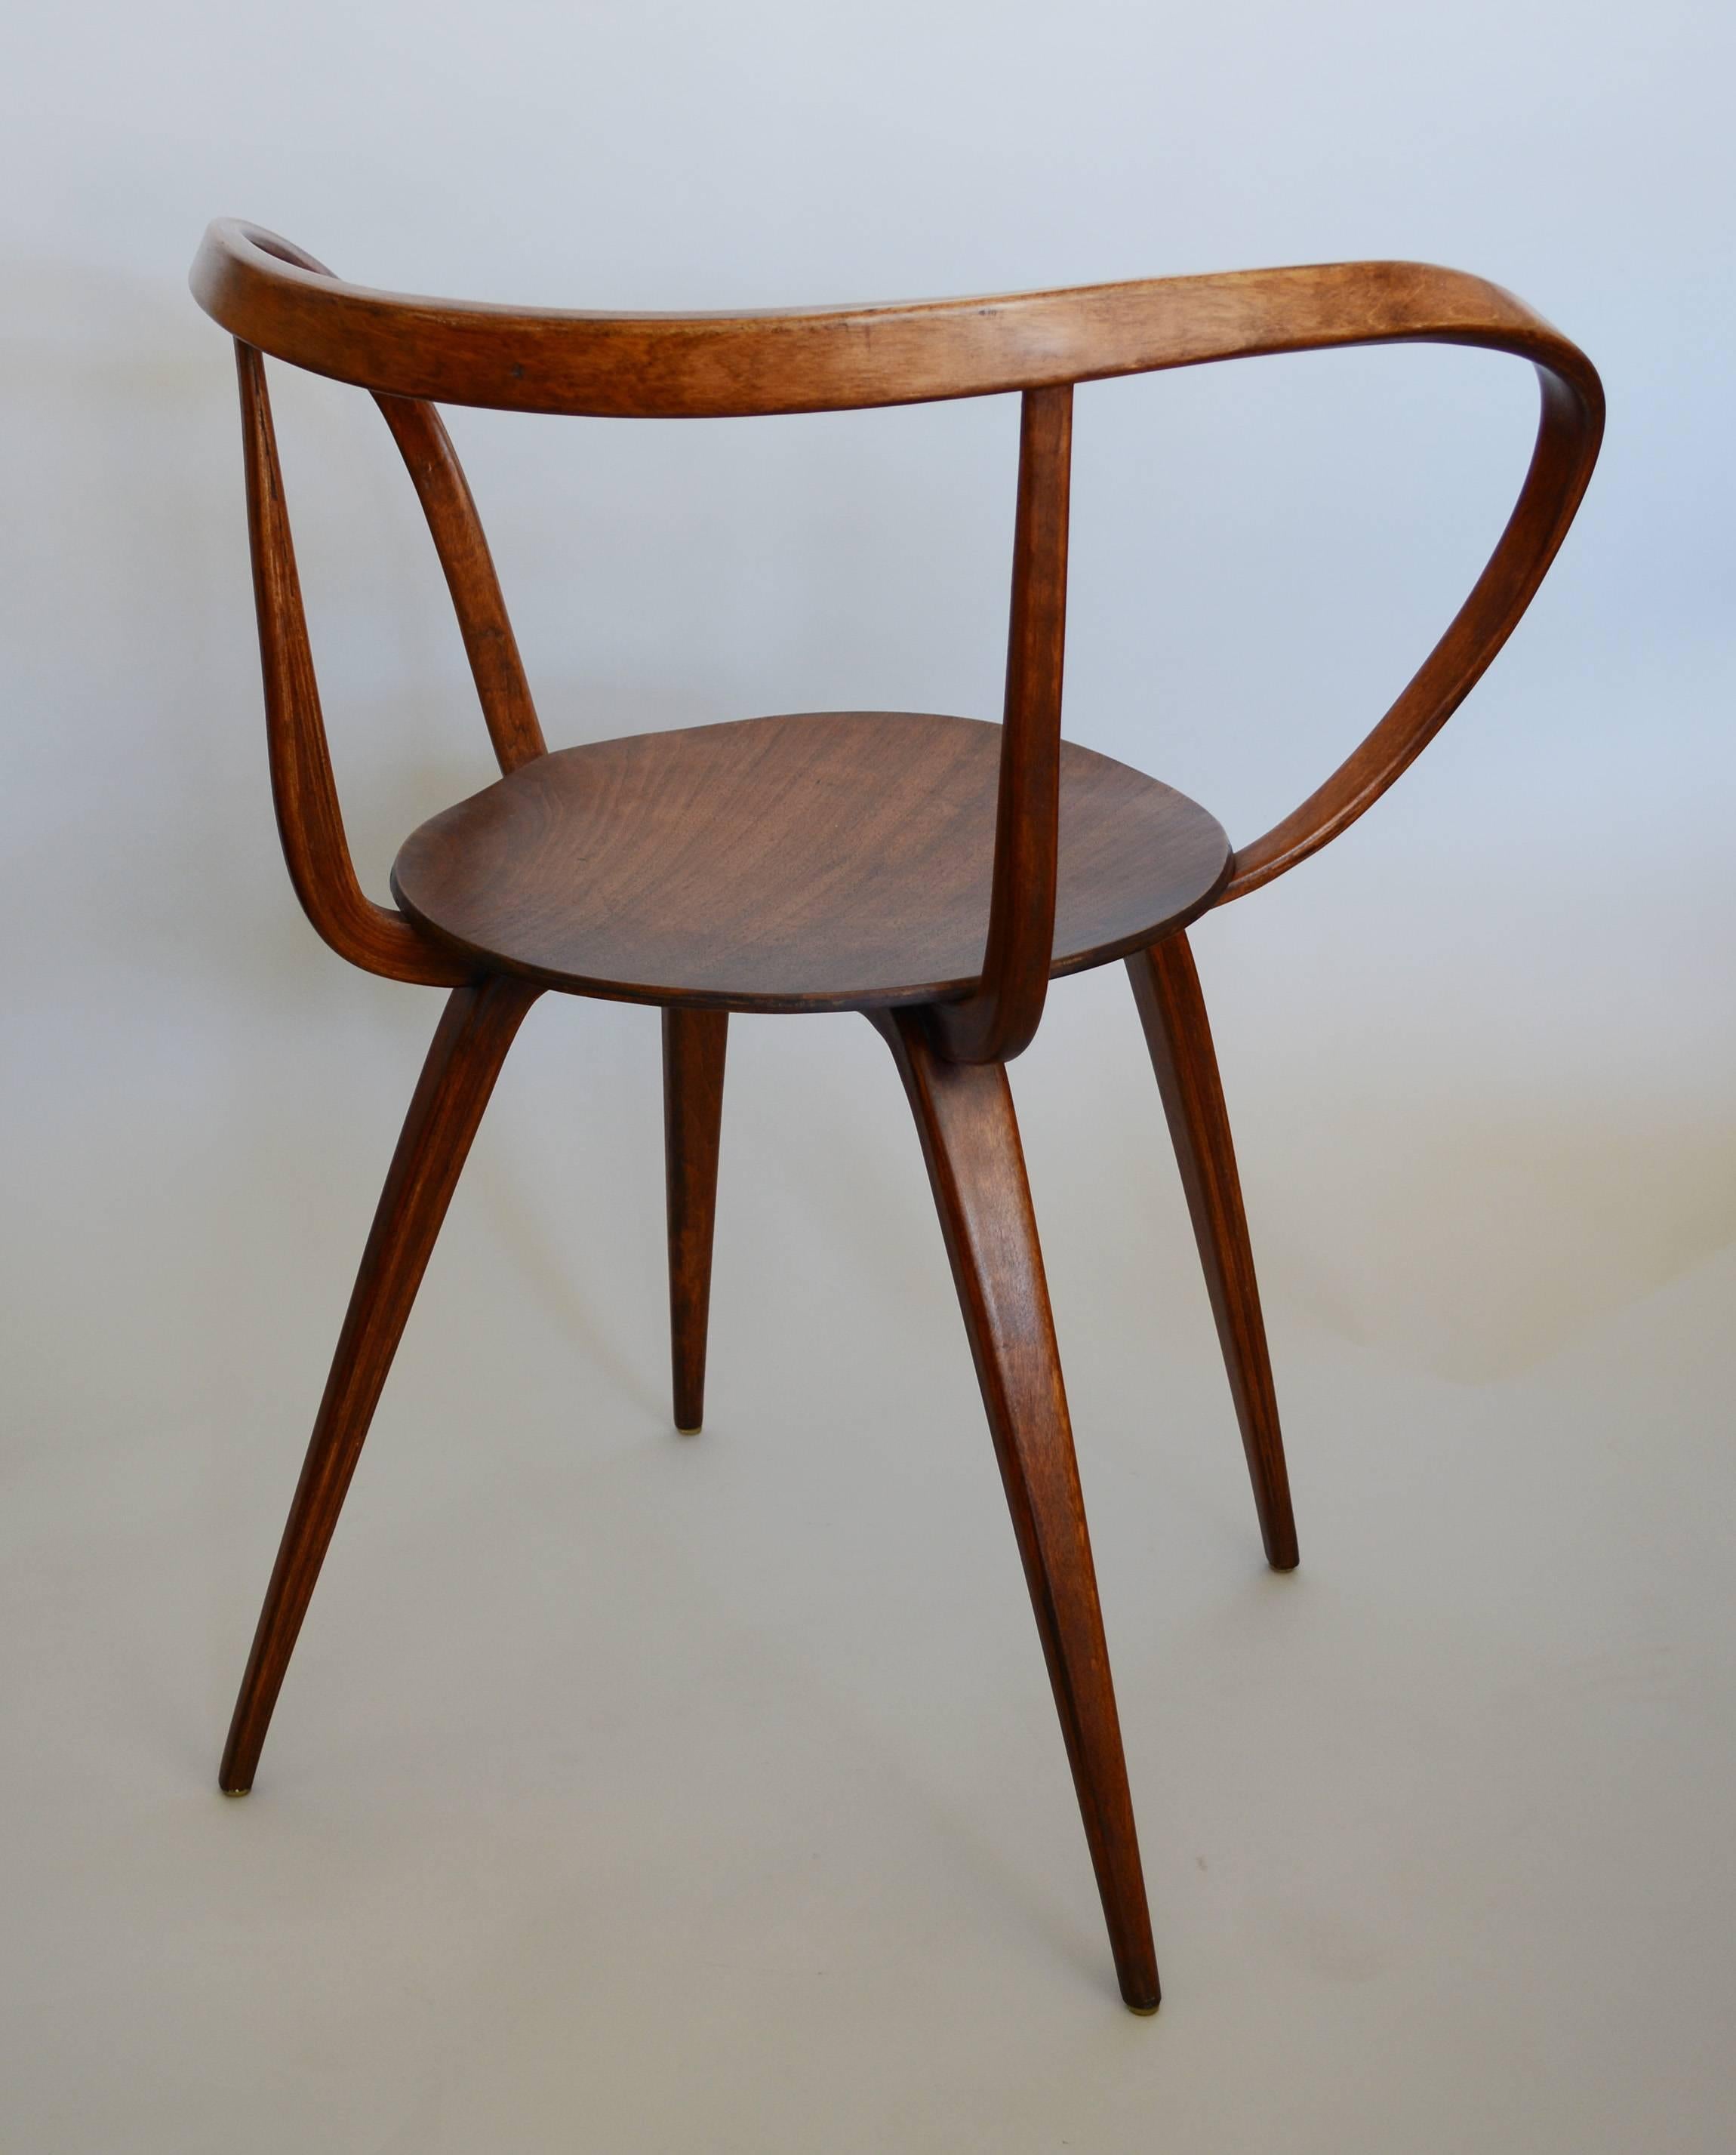 Laminated chair designed by John Pile in 1952. The chair never went into production until Plycraft took on production in 1957. Due to differences with Herman Miller it was only made for one year. This chair looks to have been refinished some time